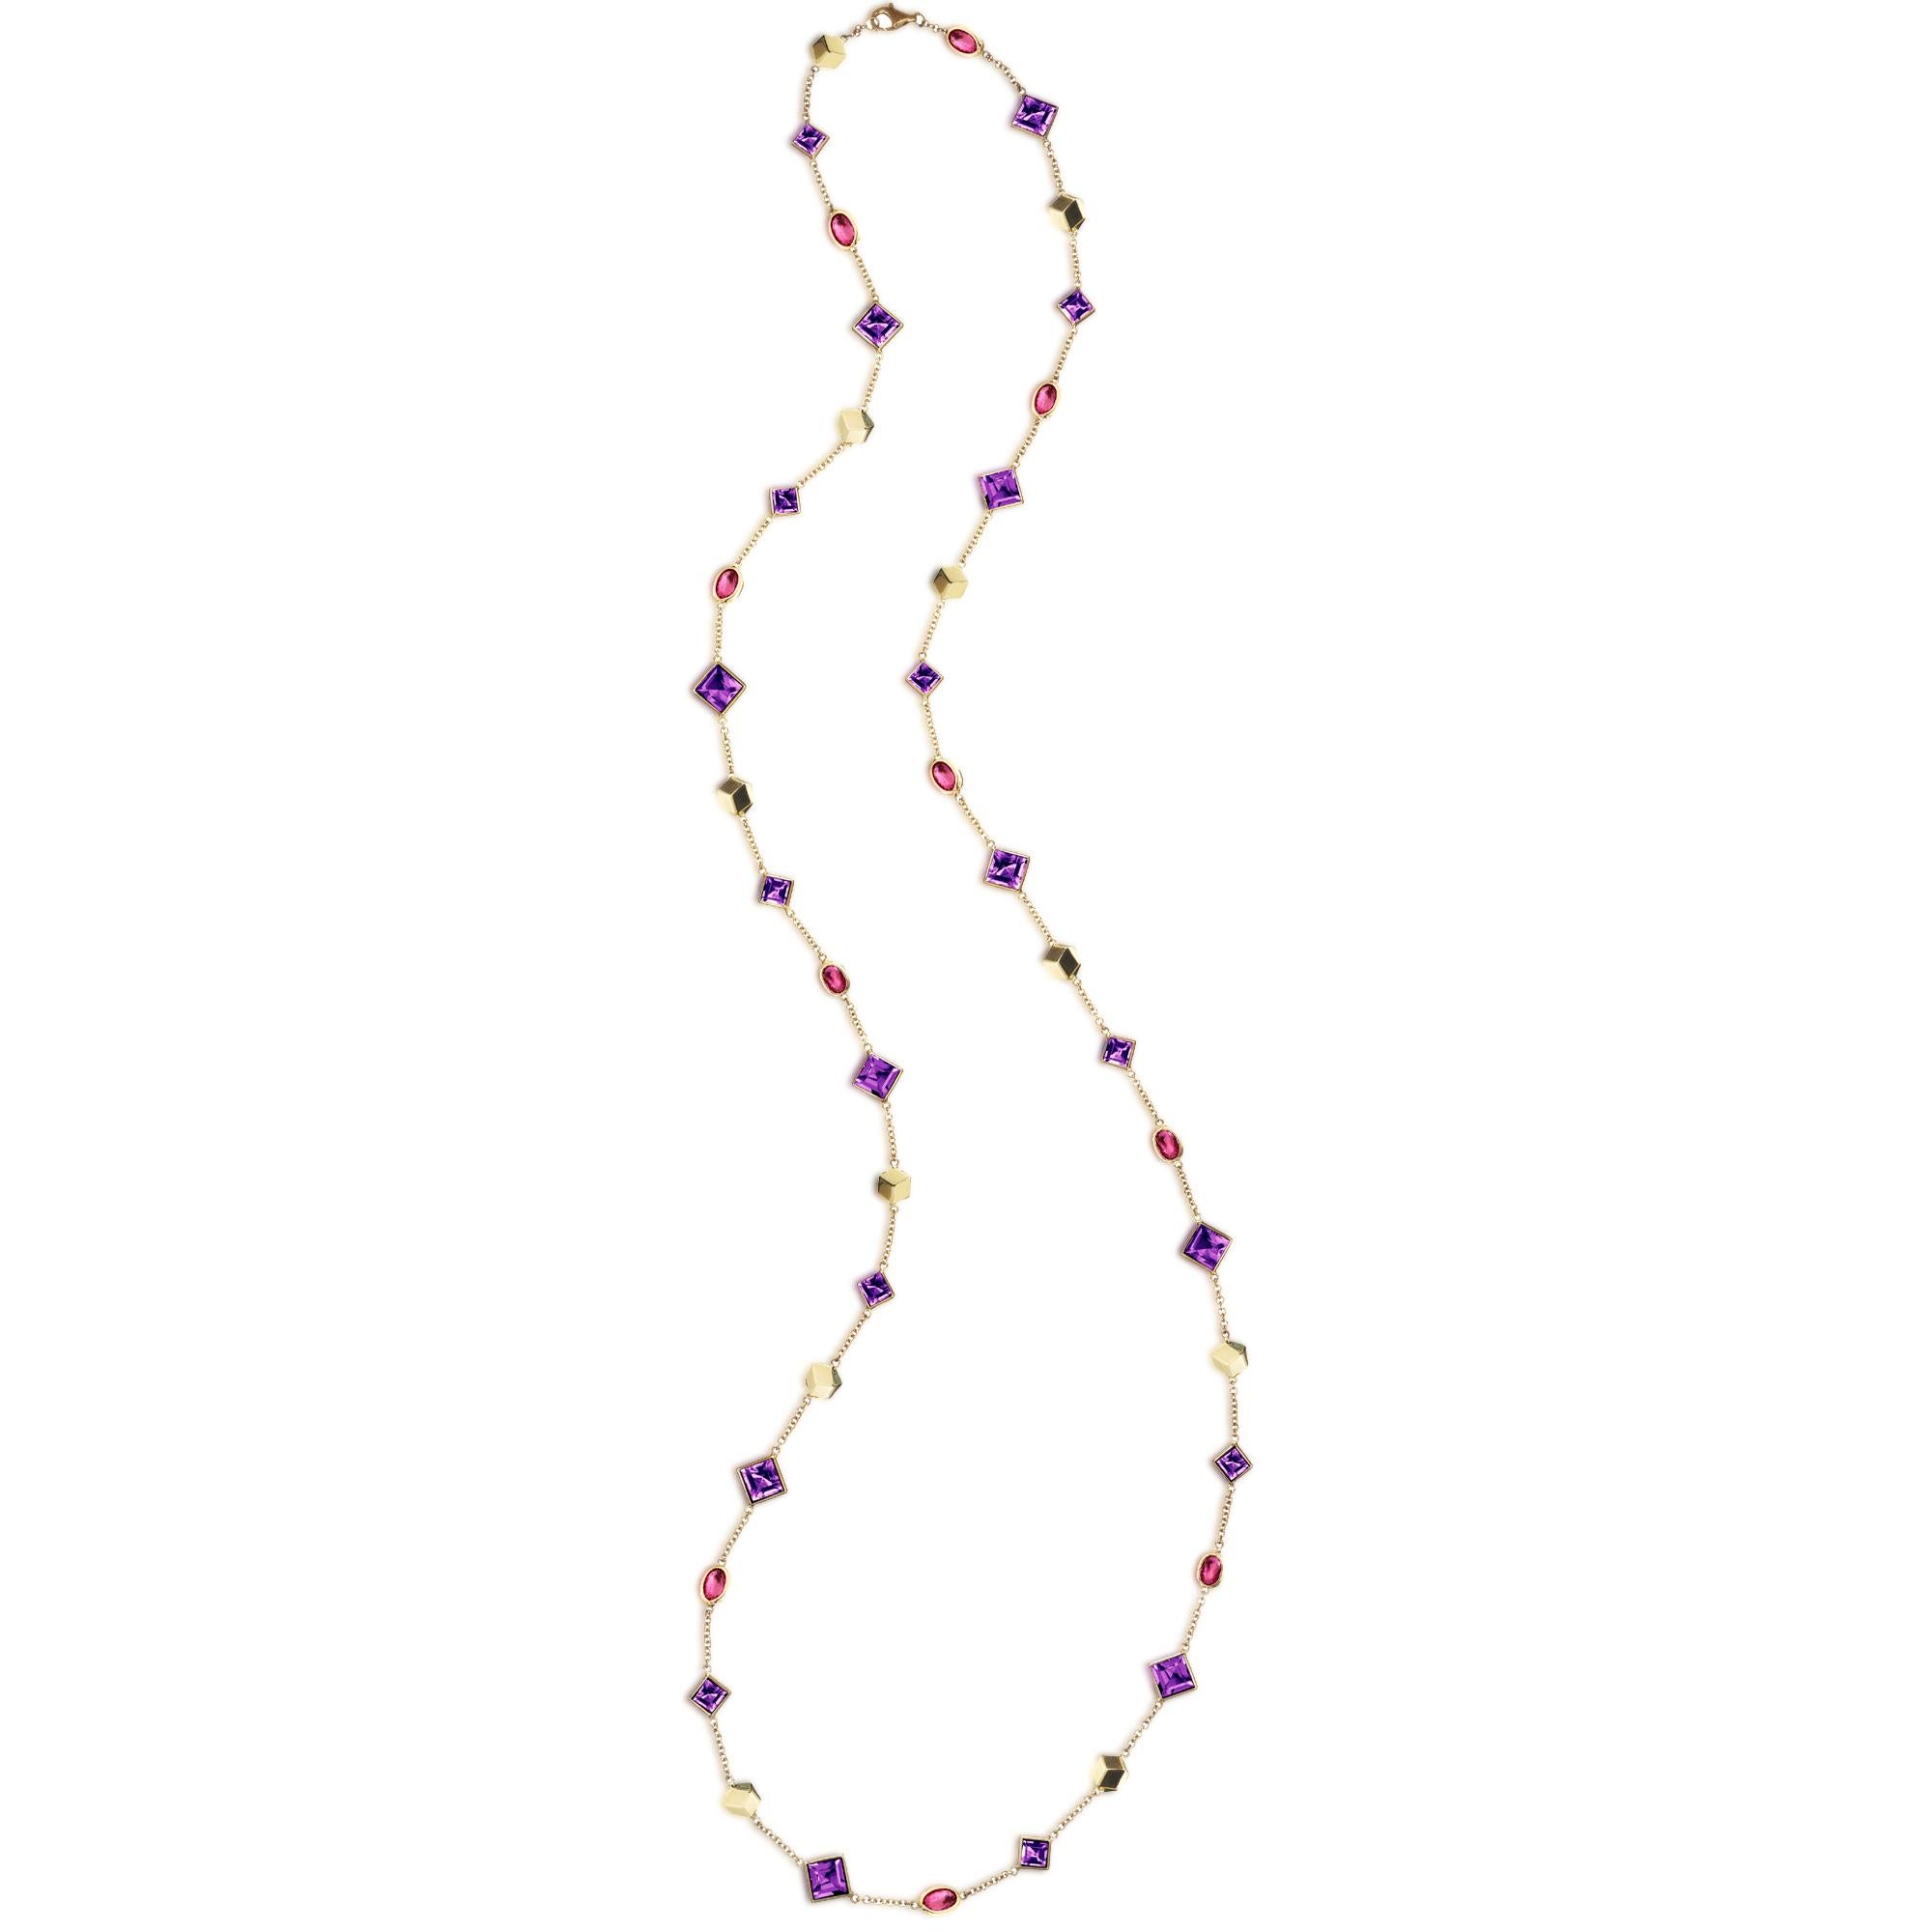 18 Karat Yellow Gold Florentine Necklace with Amethyst and Rubies